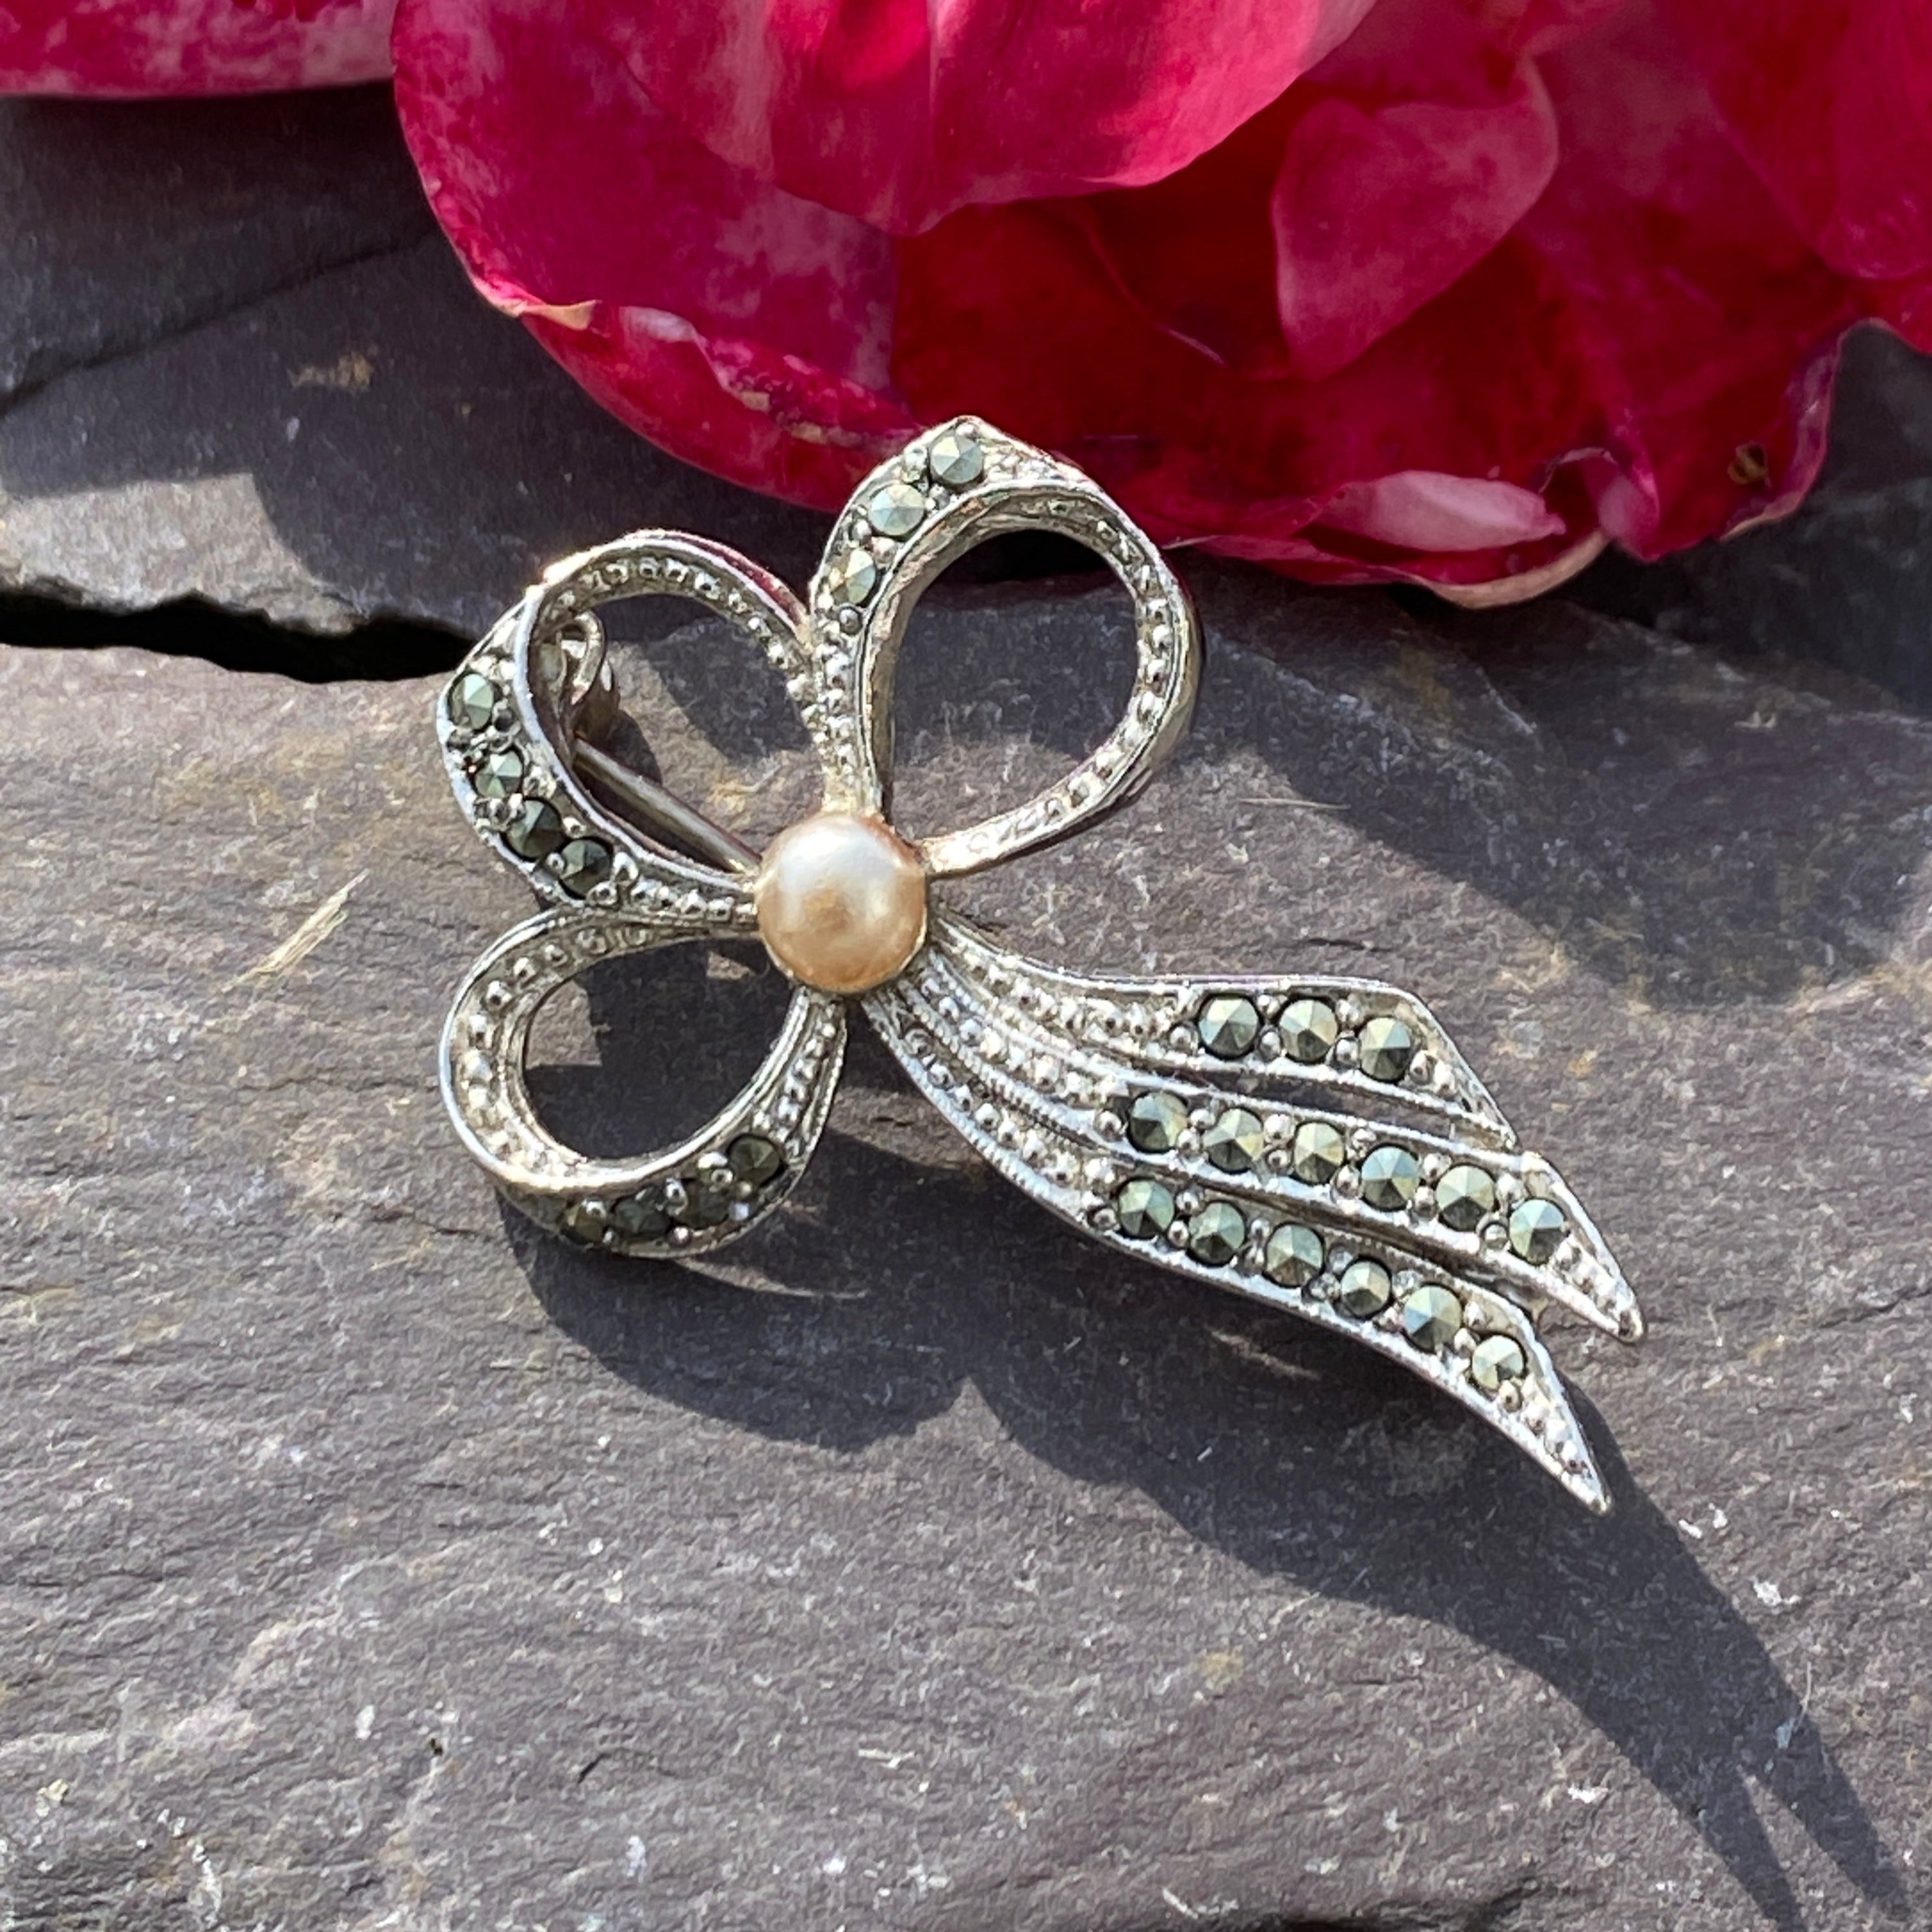 Retro Chrome Plated Marcasite & Faux Pearl Bow Brooch.